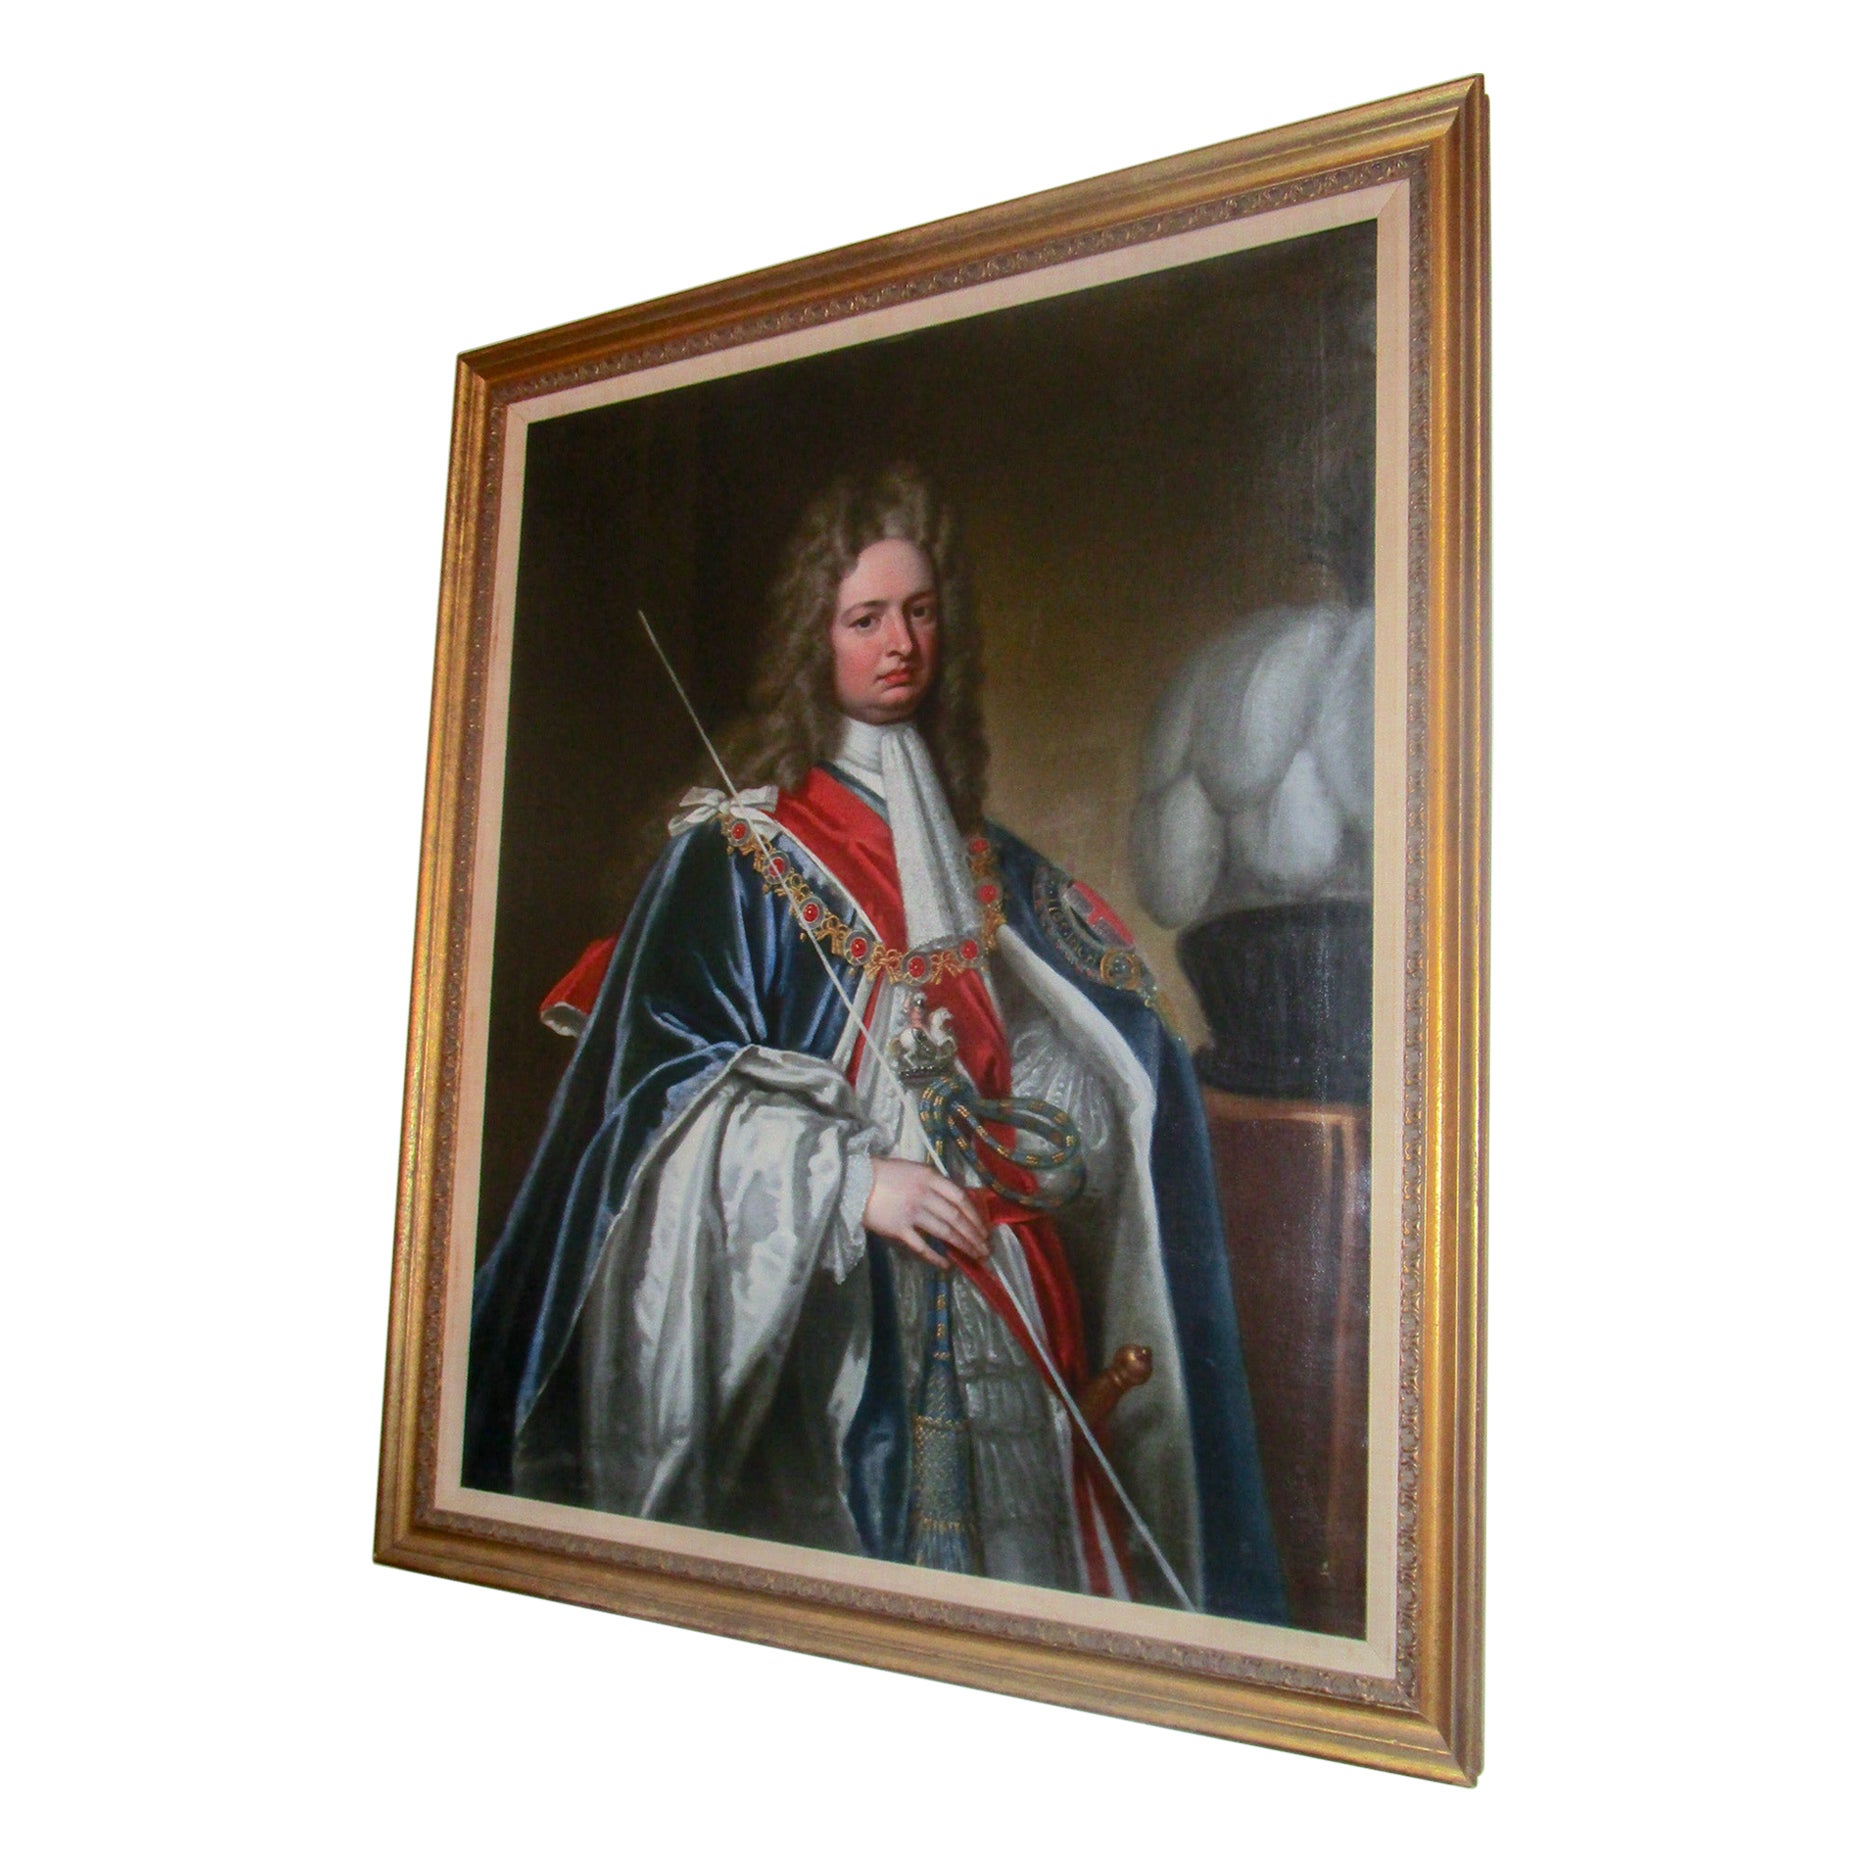 Portrait in Oil of Robert Harley 1st Earl of Oxford by Sir Godfrey Kneller